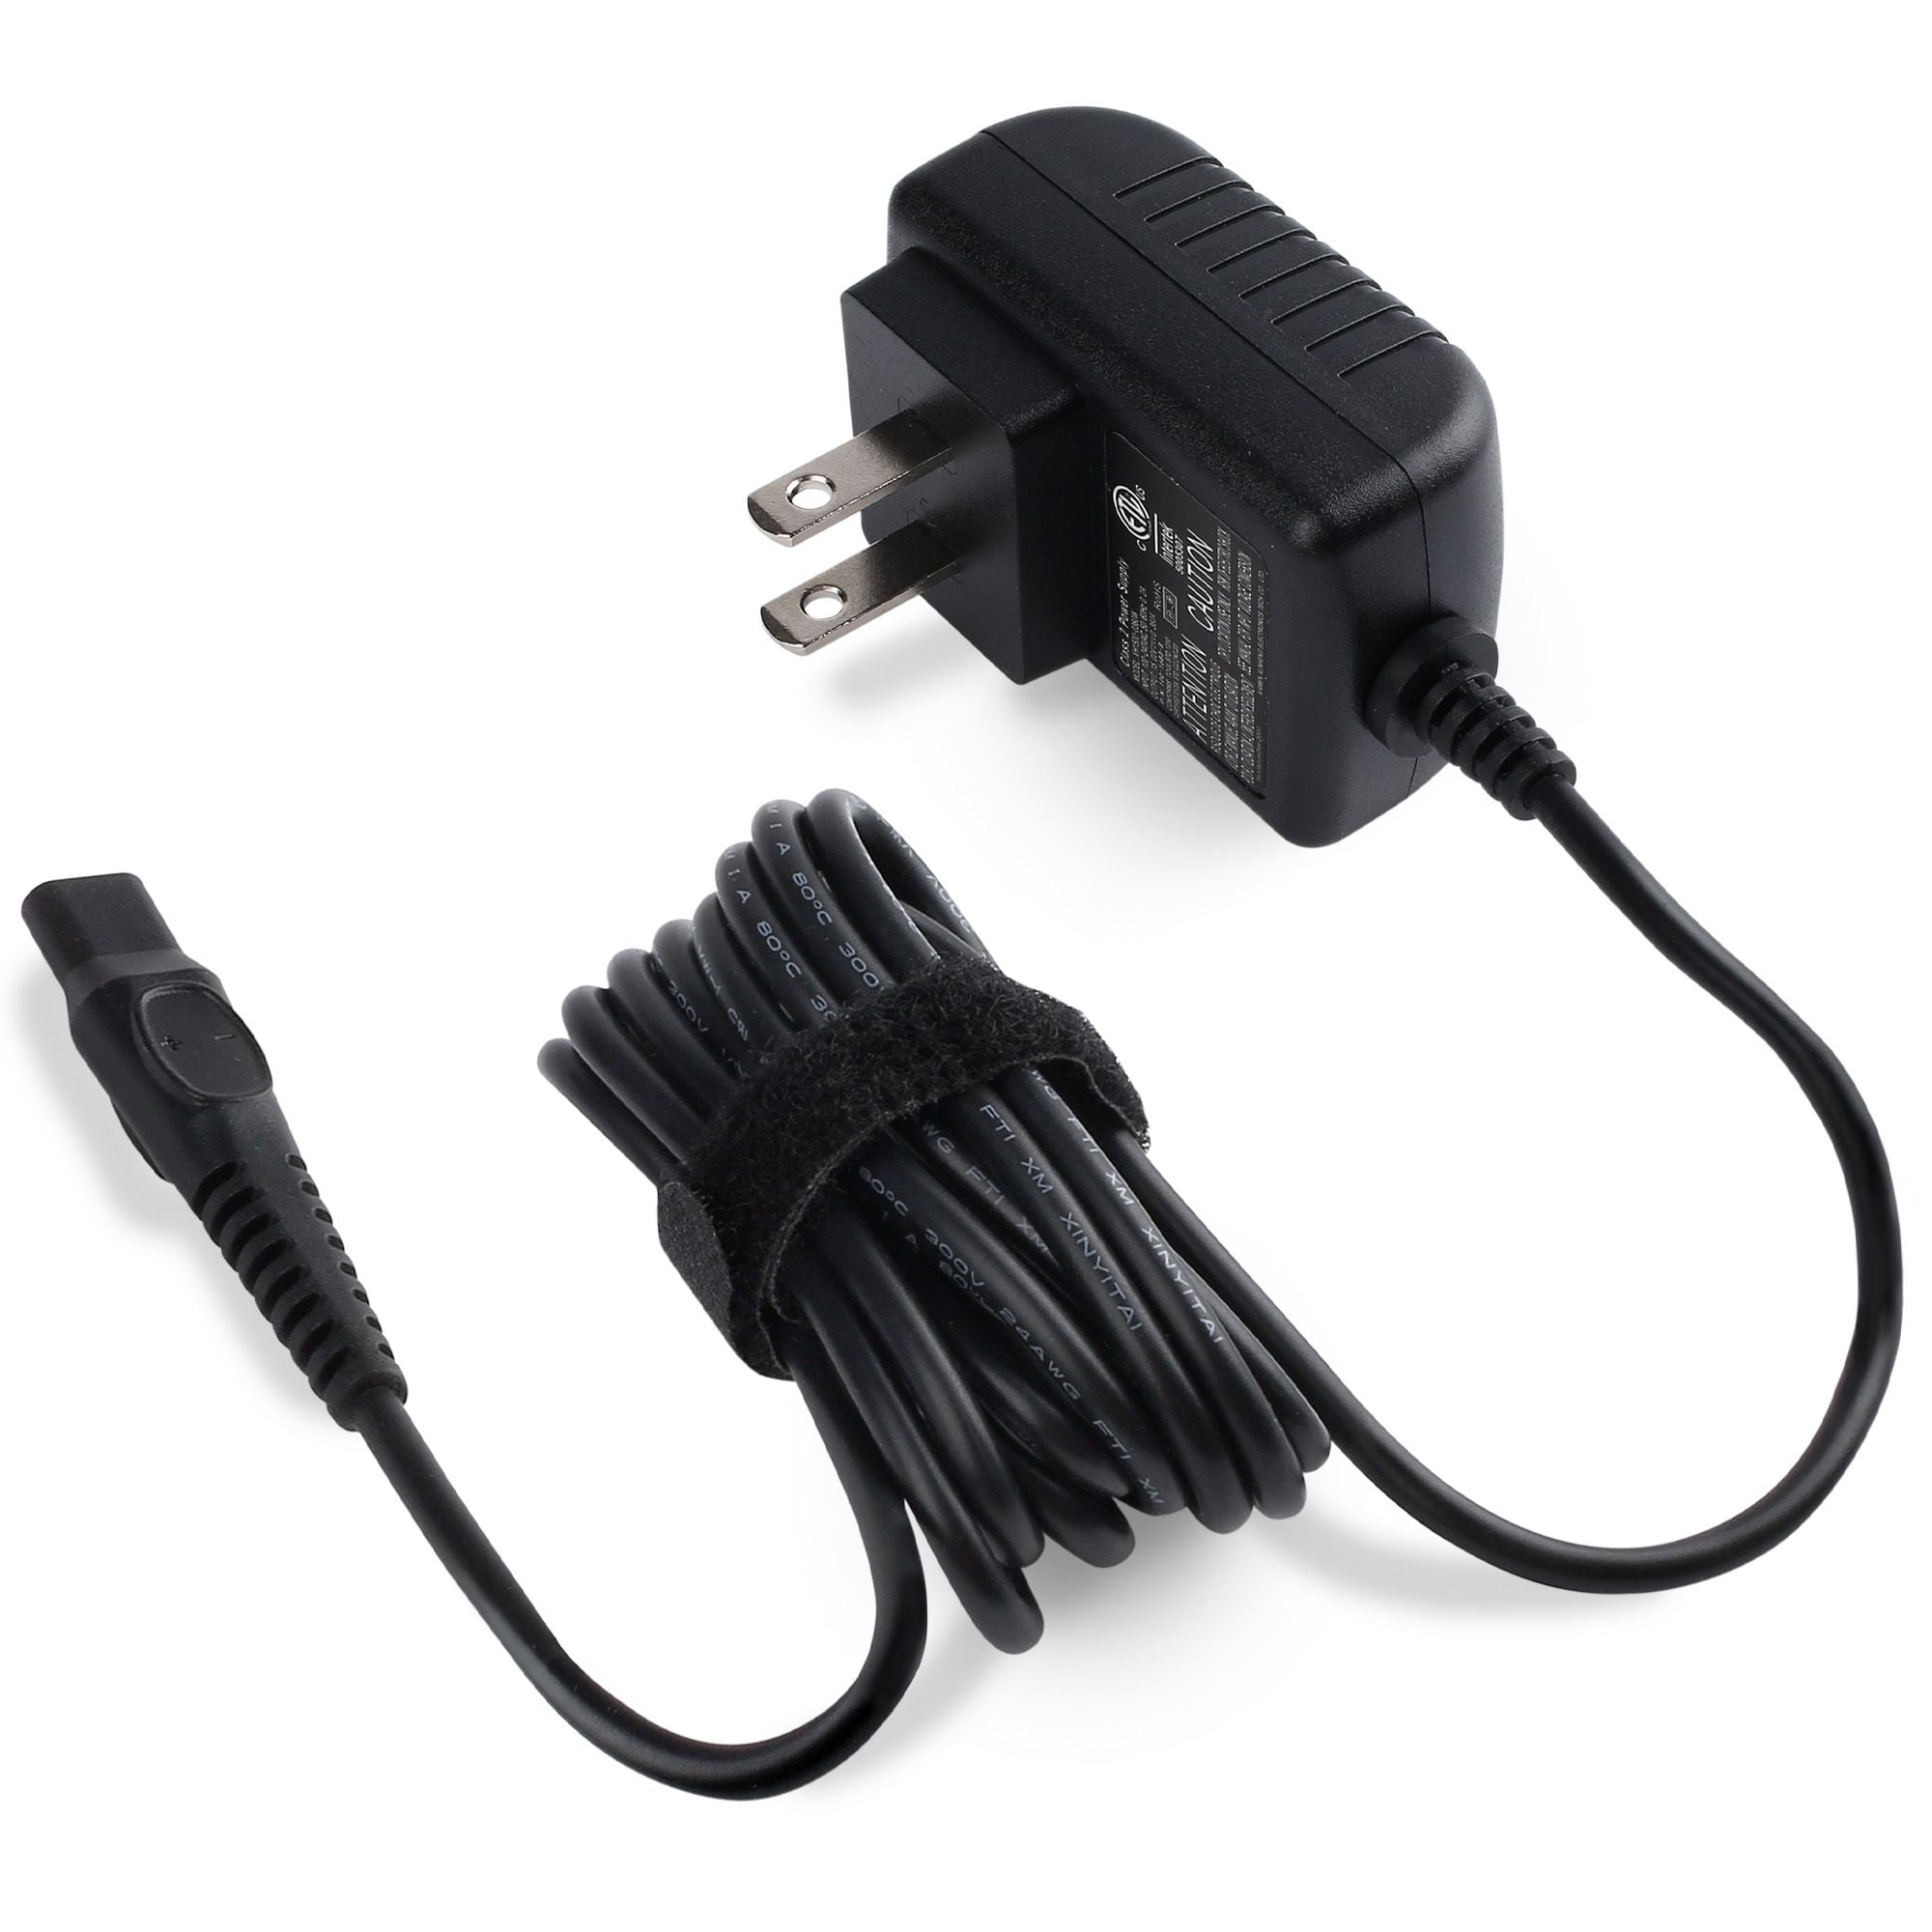 Super Power Supply® Charger Cord for Philips Norelco 8825XL Shaver Charger 